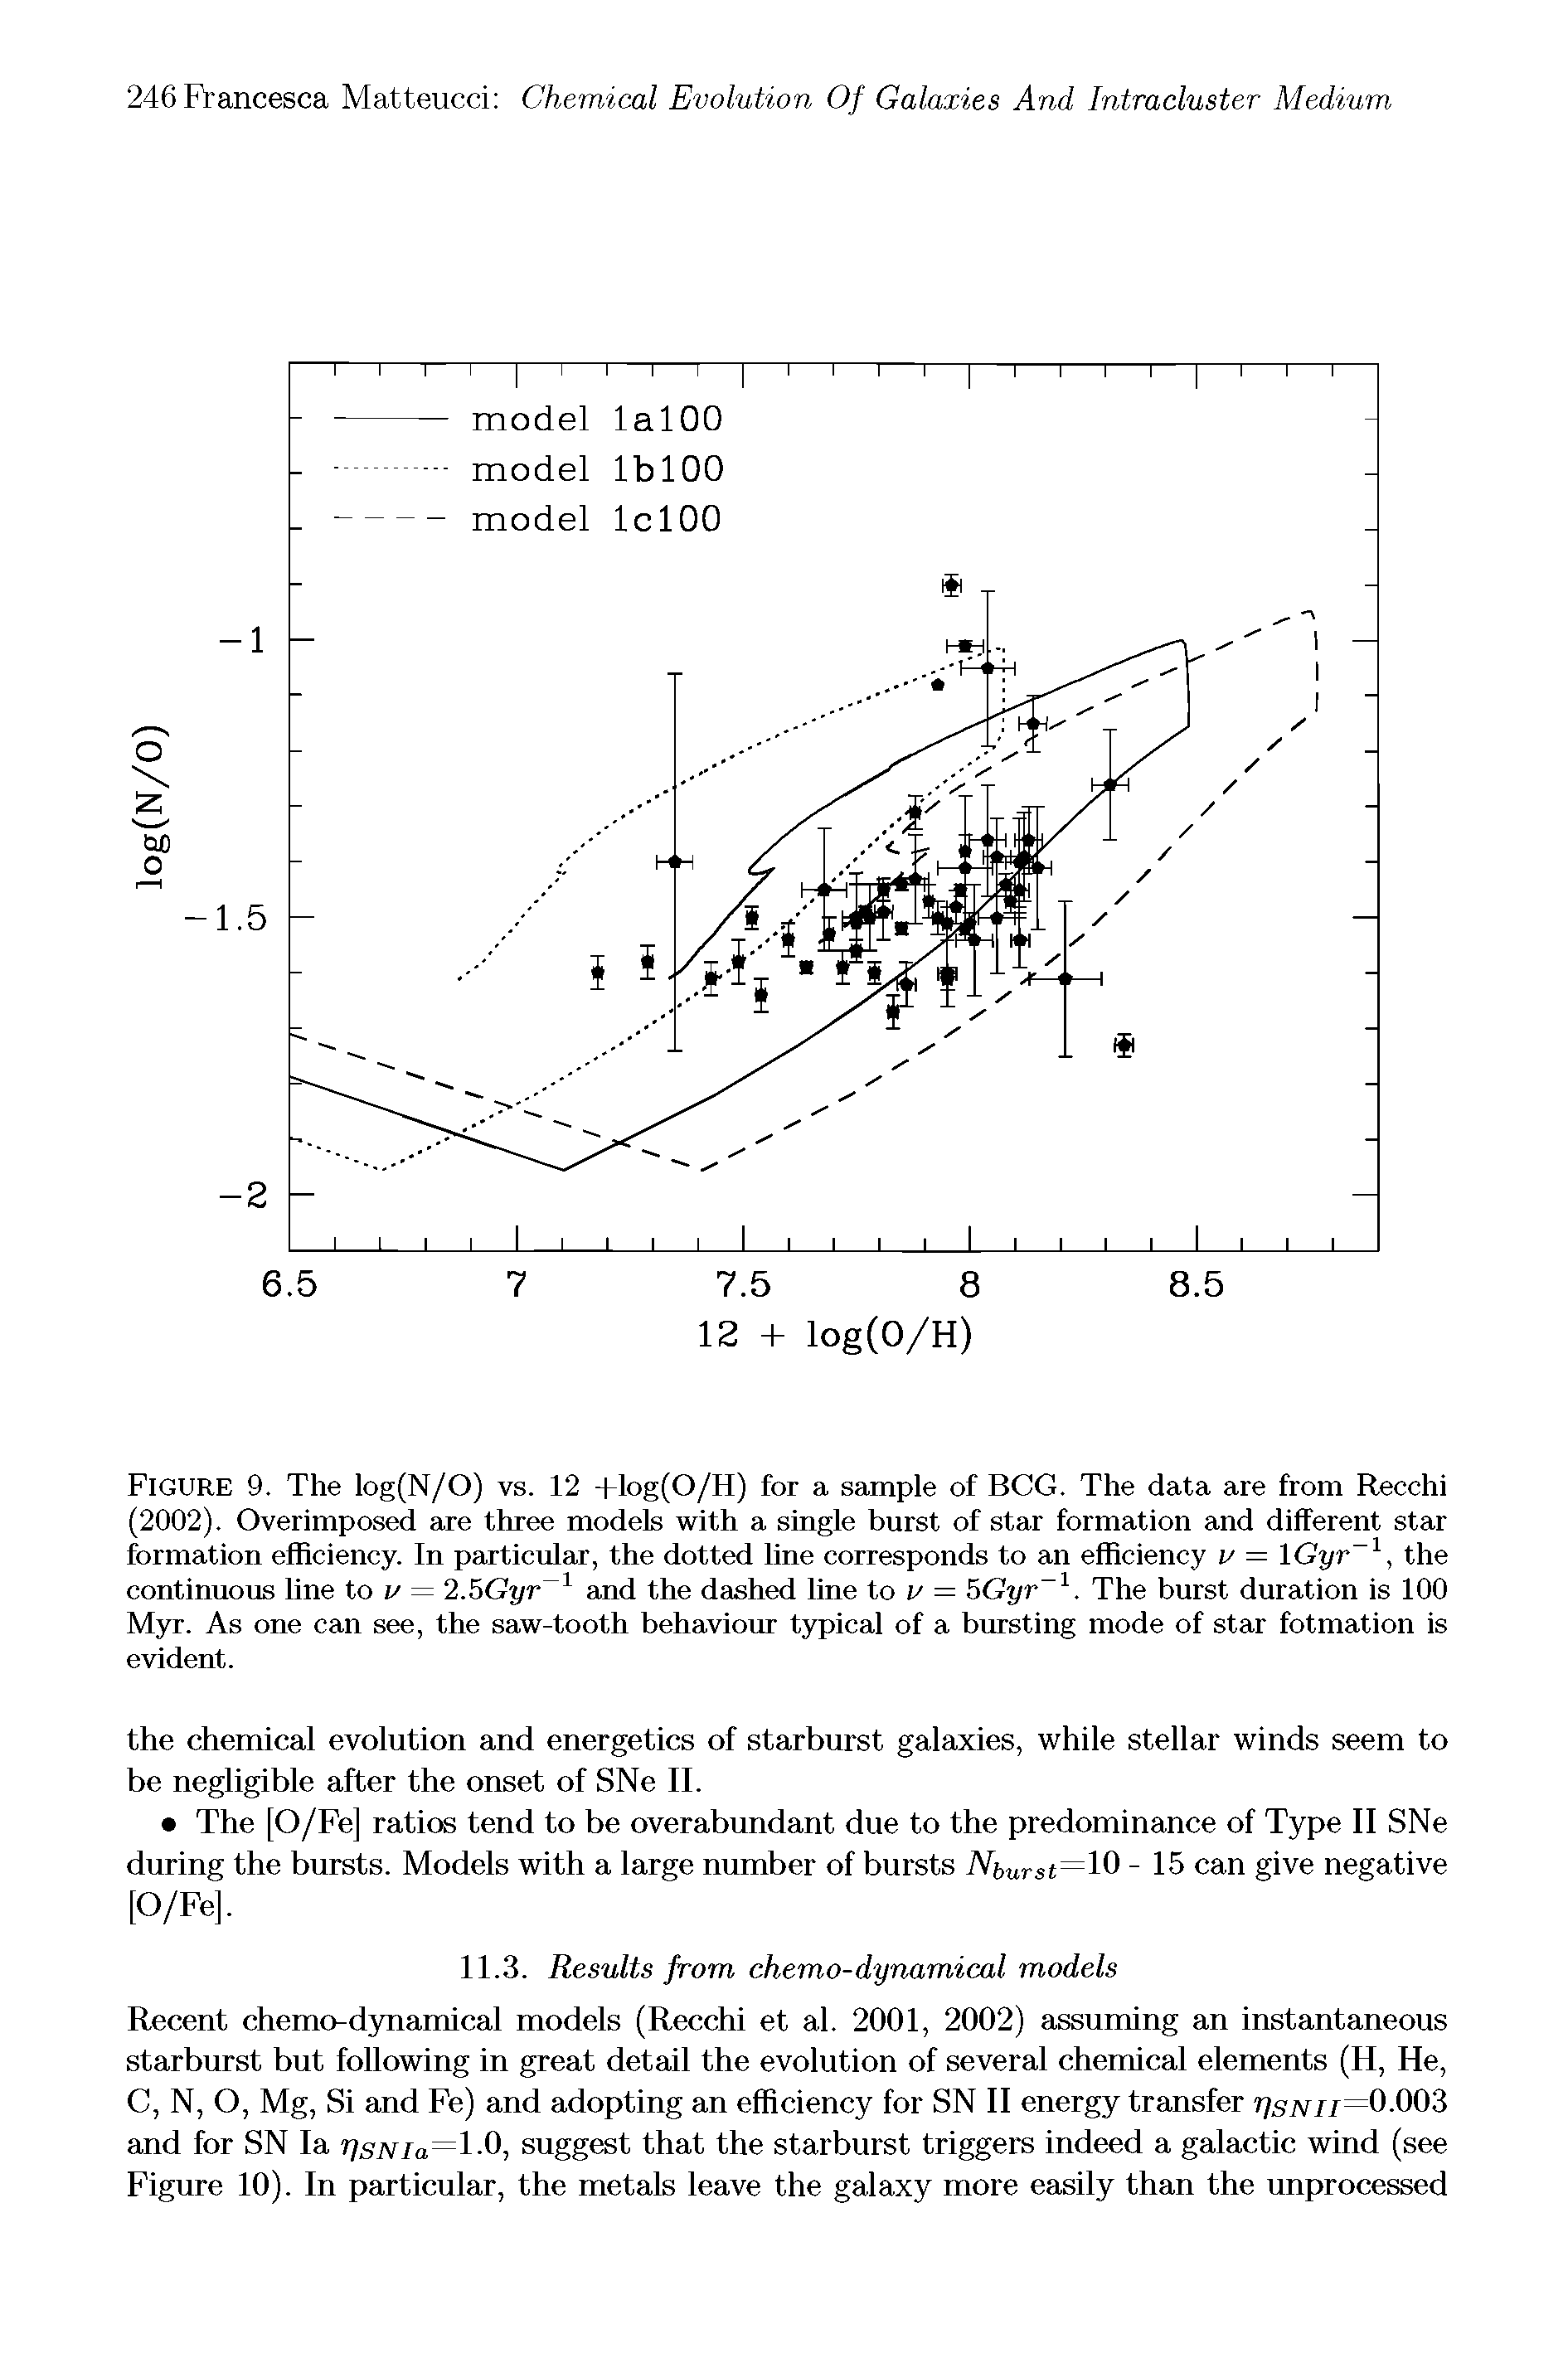 Figure 9. The log(N/0) vs. 12 +log(0/H) for a sample of BCG. The data are from Recchi (2002). Overimposed are three models with a single burst of star formation and different star formation efficiency. In particular, the dotted line corresponds to an efficiency v = Gyr l, the continuous fine to v = 2.50yr 1 and the dashed fine to / = 5Gj/r 1. The burst duration is 100 Myr. As one can see, the saw-tooth behaviour typical of a bursting mode of star fotmation is evident.